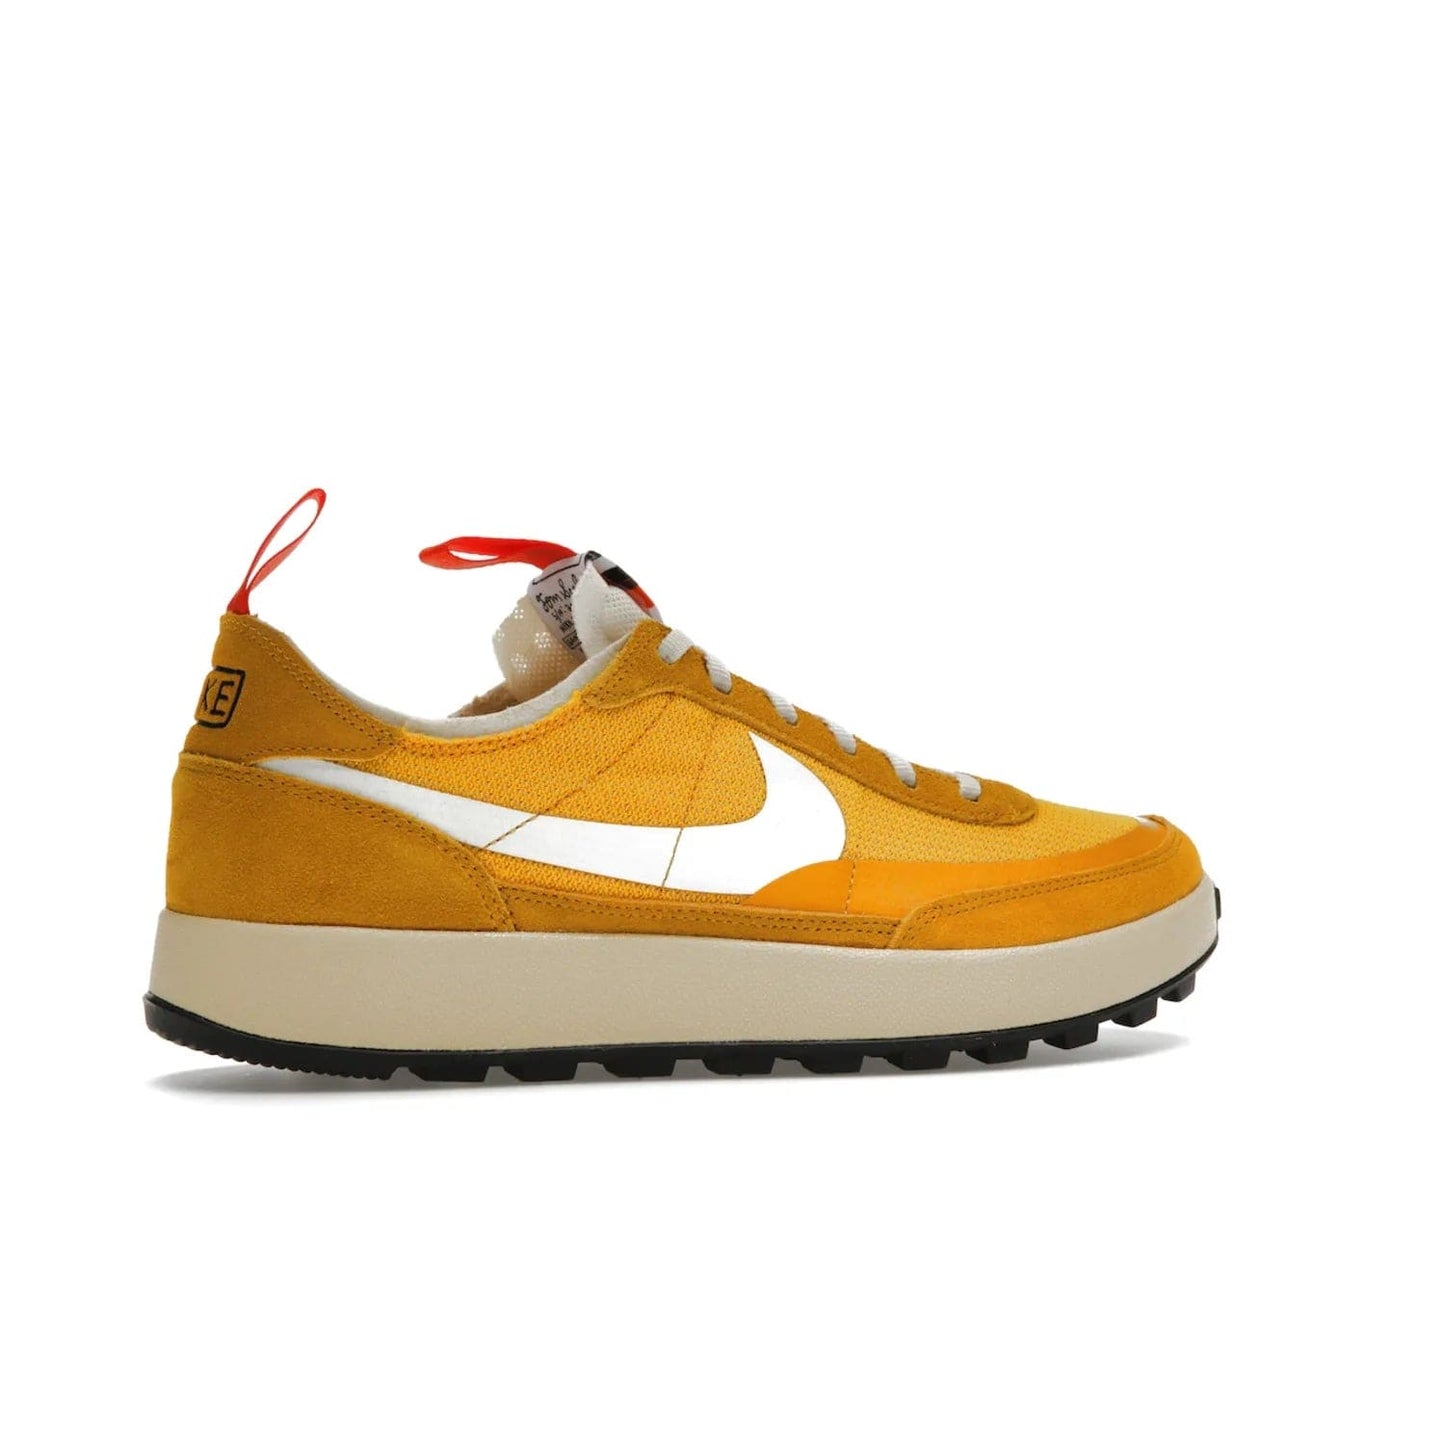 NikeCraft General Purpose Shoe Tom Sachs Archive Dark Sulfur - Image 35 - Only at www.BallersClubKickz.com - Collab between Nike & Tom Sachs. The NikeCraft General Purpose Shoe features dark sulfur mesh upper, suede overlays, contrasting white Swoosh and orange tabs. EVA cushioning & black waffle-traction rubber outsole ensures performance. Stylish & perfect for any occasion, the shoe released September 2, 2022.